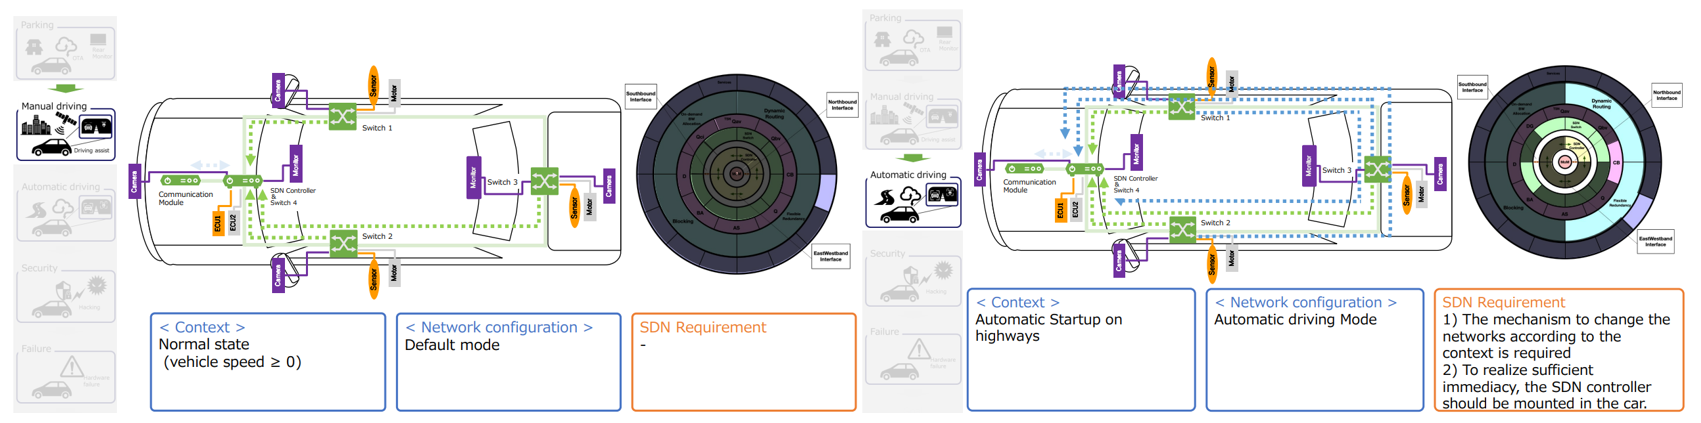 Manual driving vs automated driving with SDN